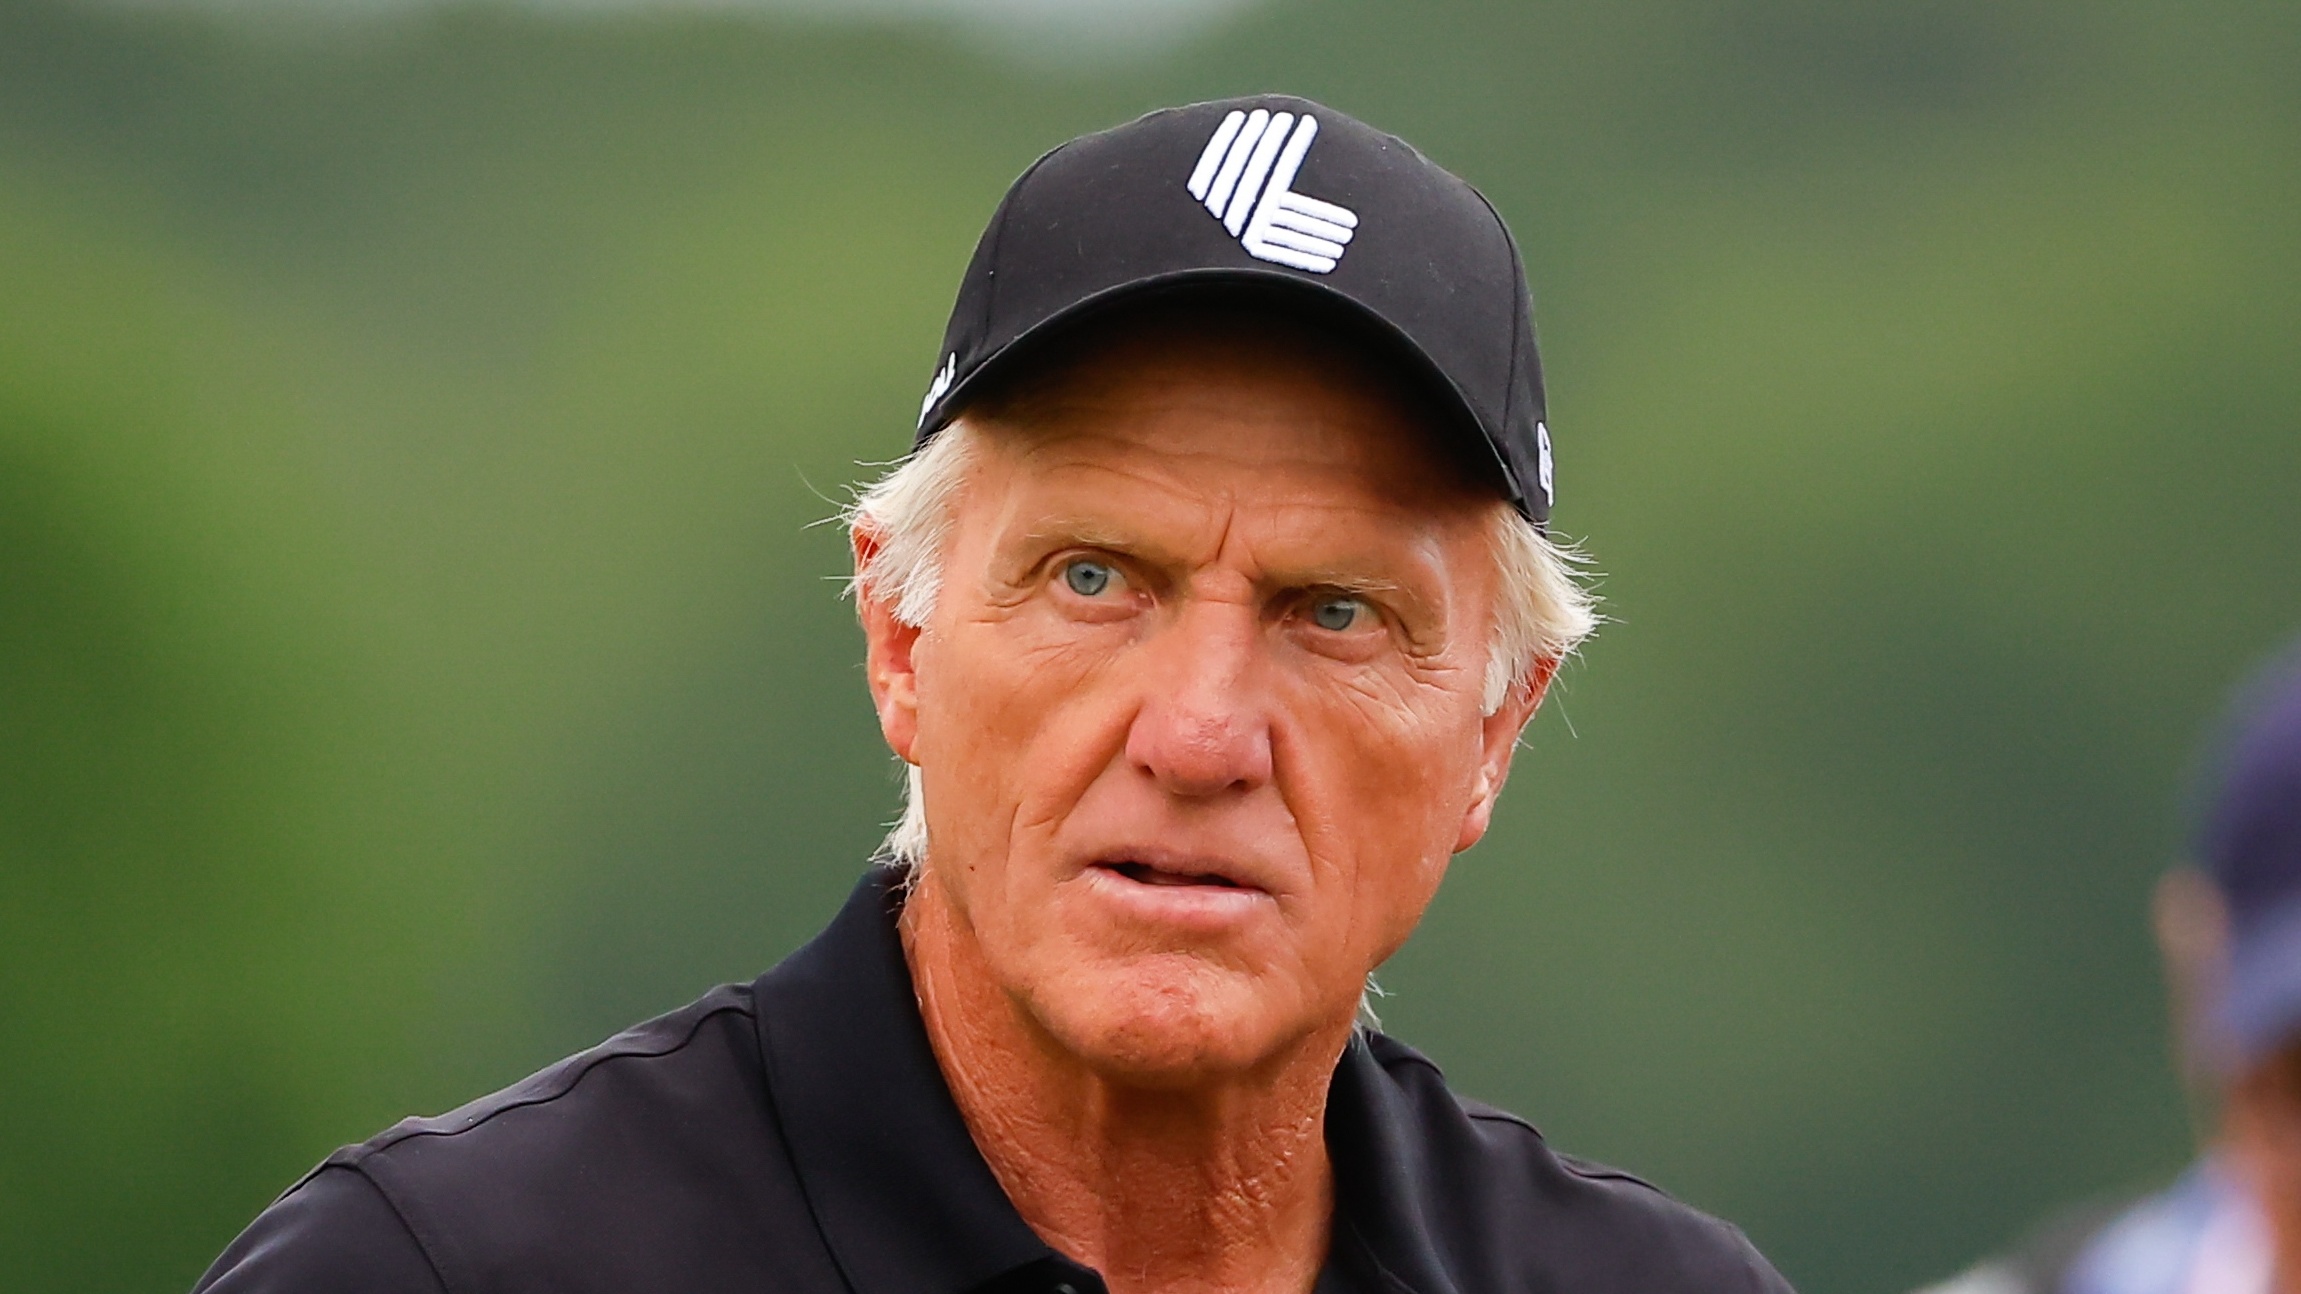 greg norman insists liv golf will still be in operation after prospective pga tour deal and 'well past' death of 'young' yasir al-rumayyan